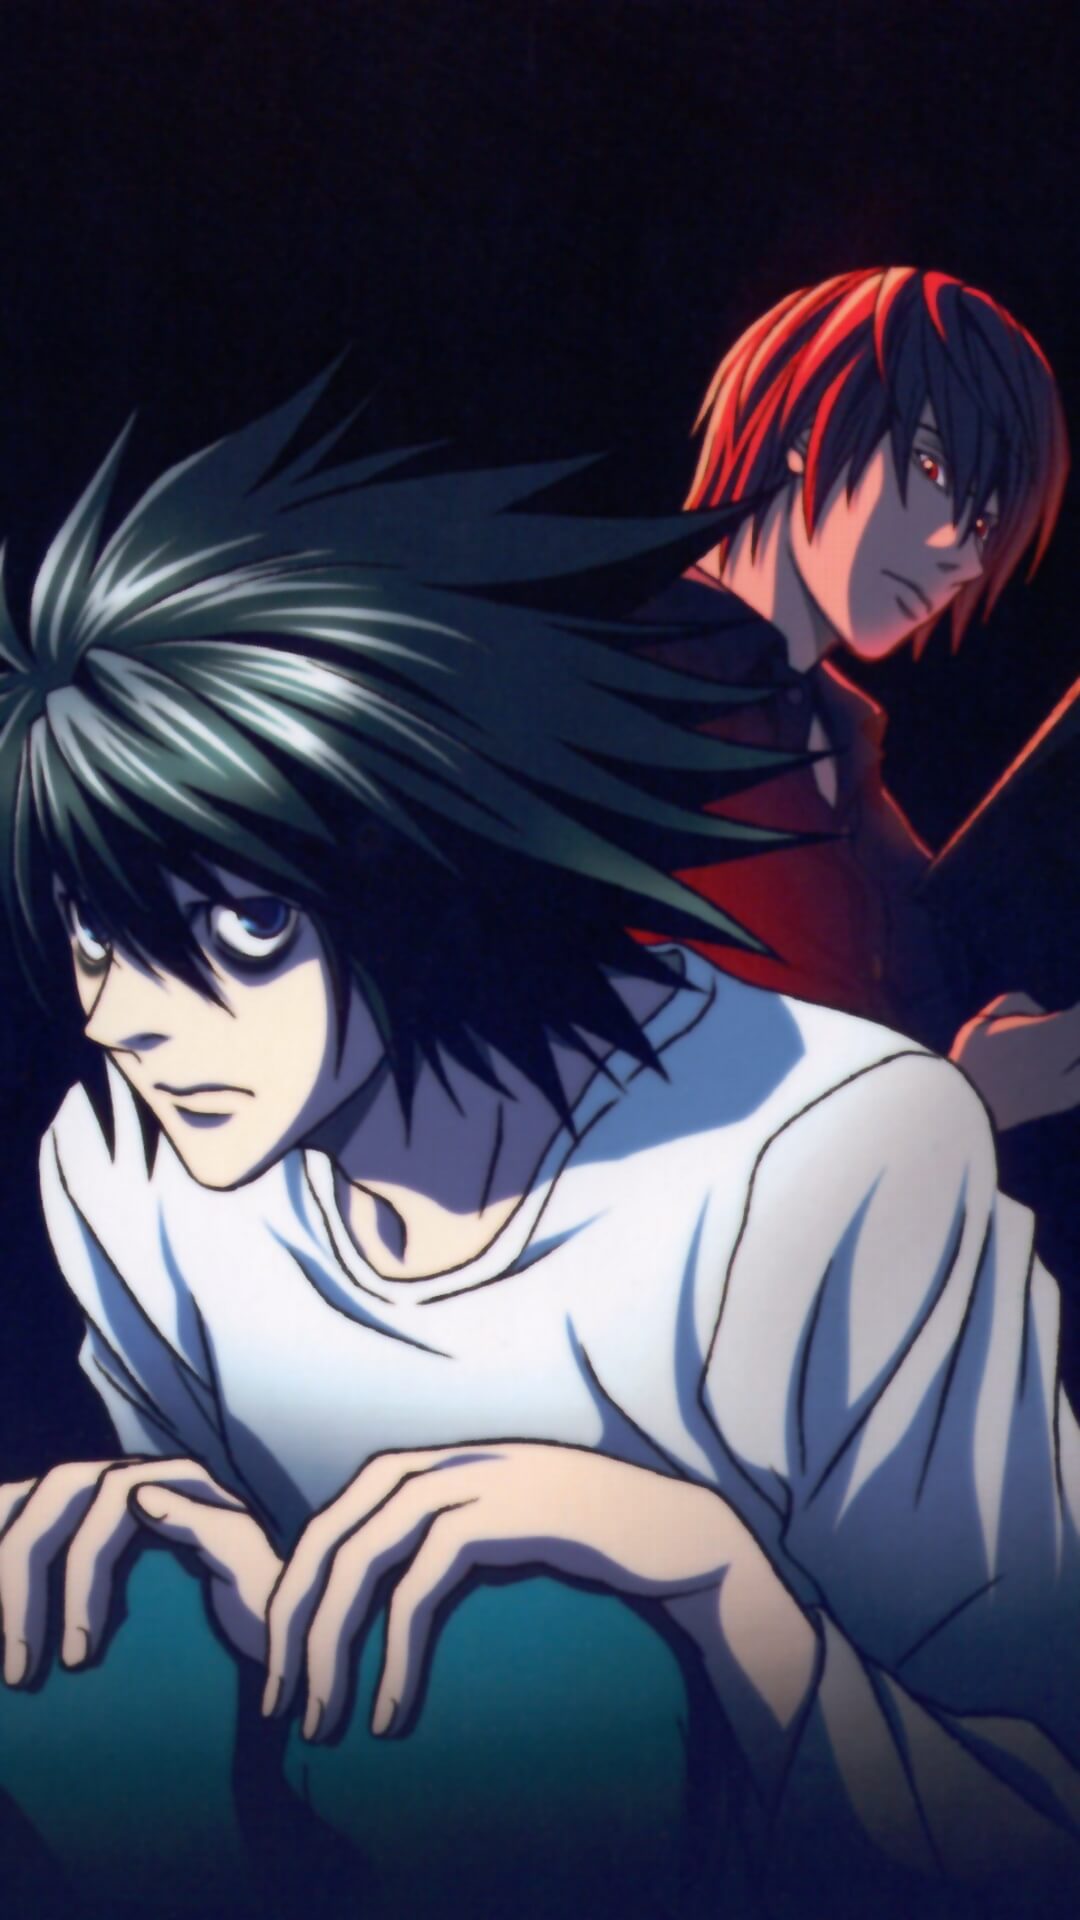 Death note L wallpaper srry for bad quality  9GAG